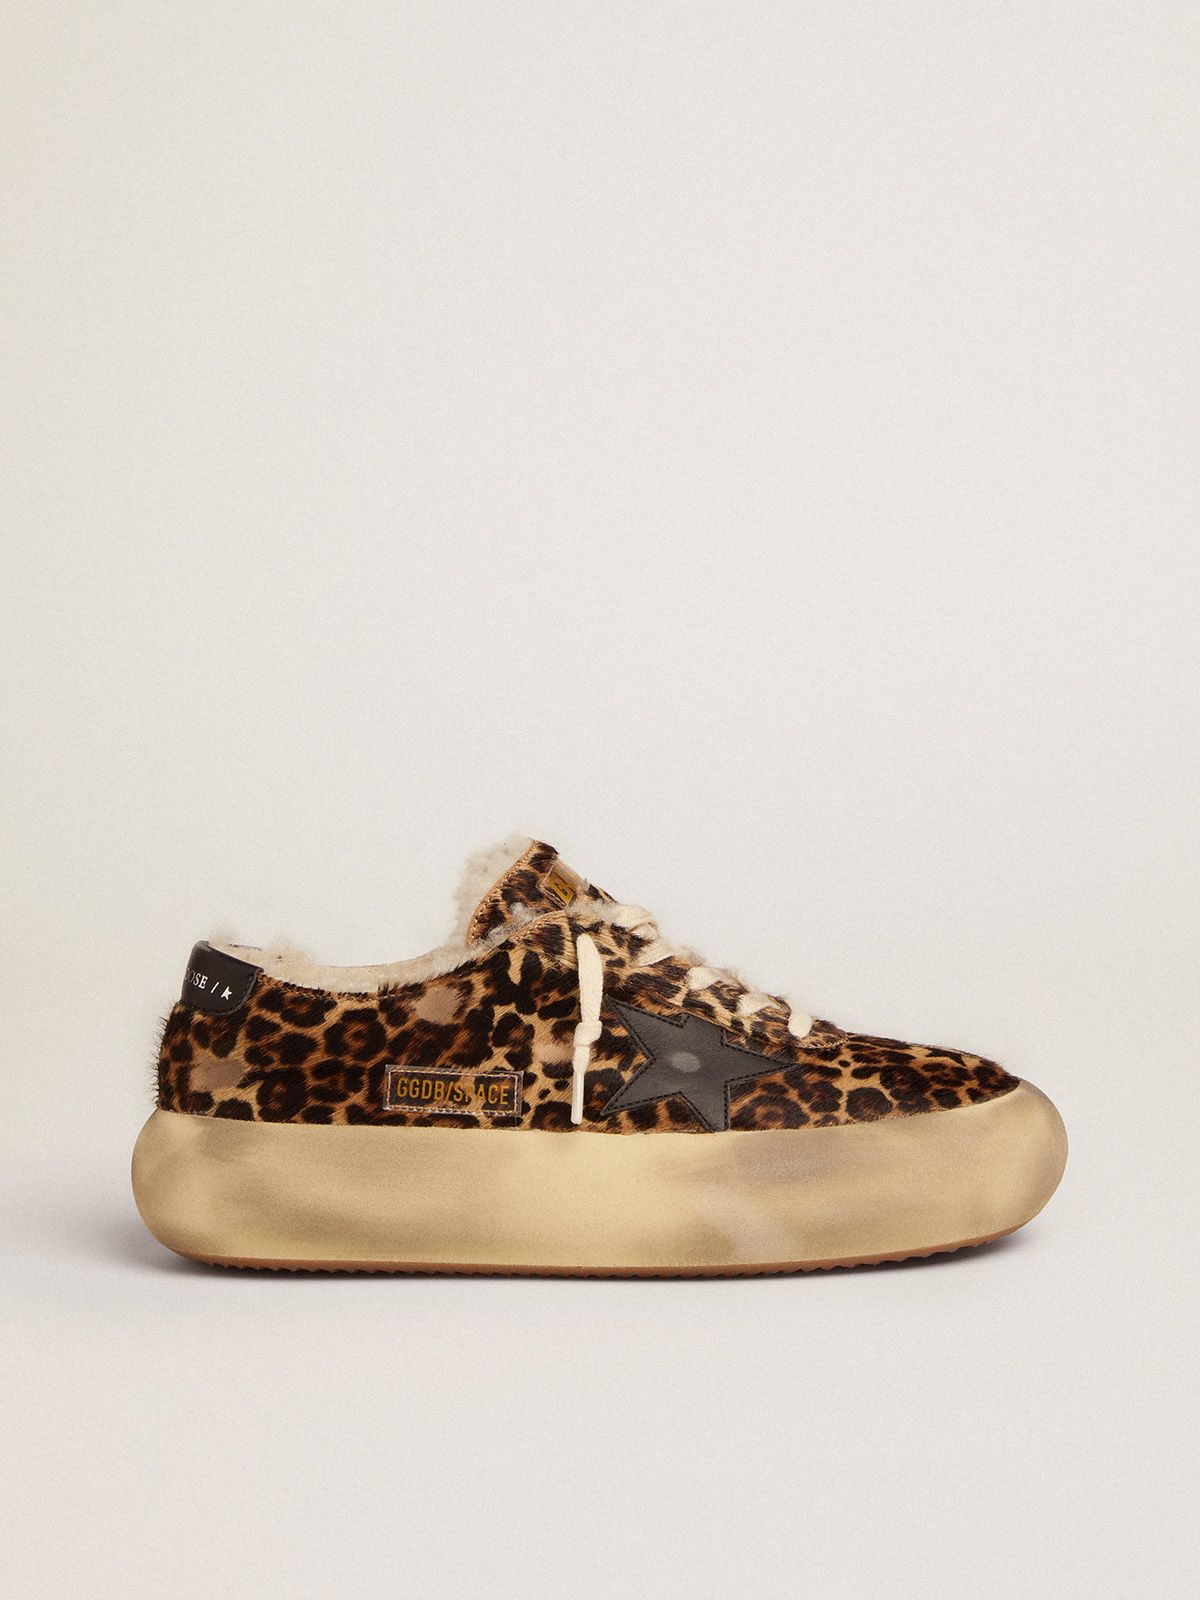 golden goose shearling pony in Space-Star skin lining animal-print shoes with